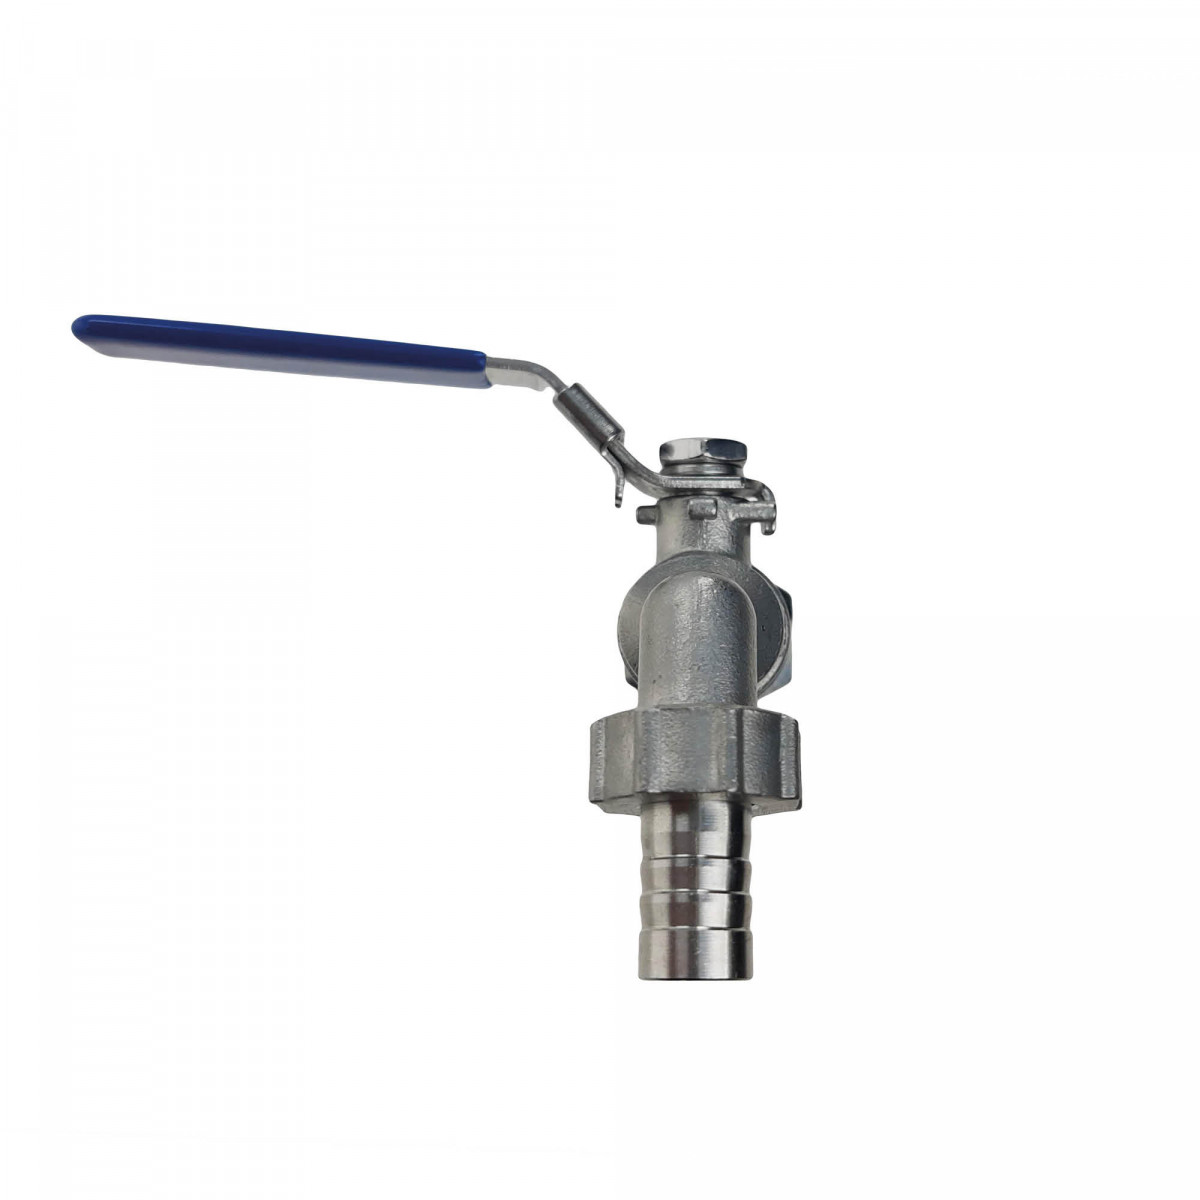 Ball valve 1/2" with counter nut and 13 mm nozzle